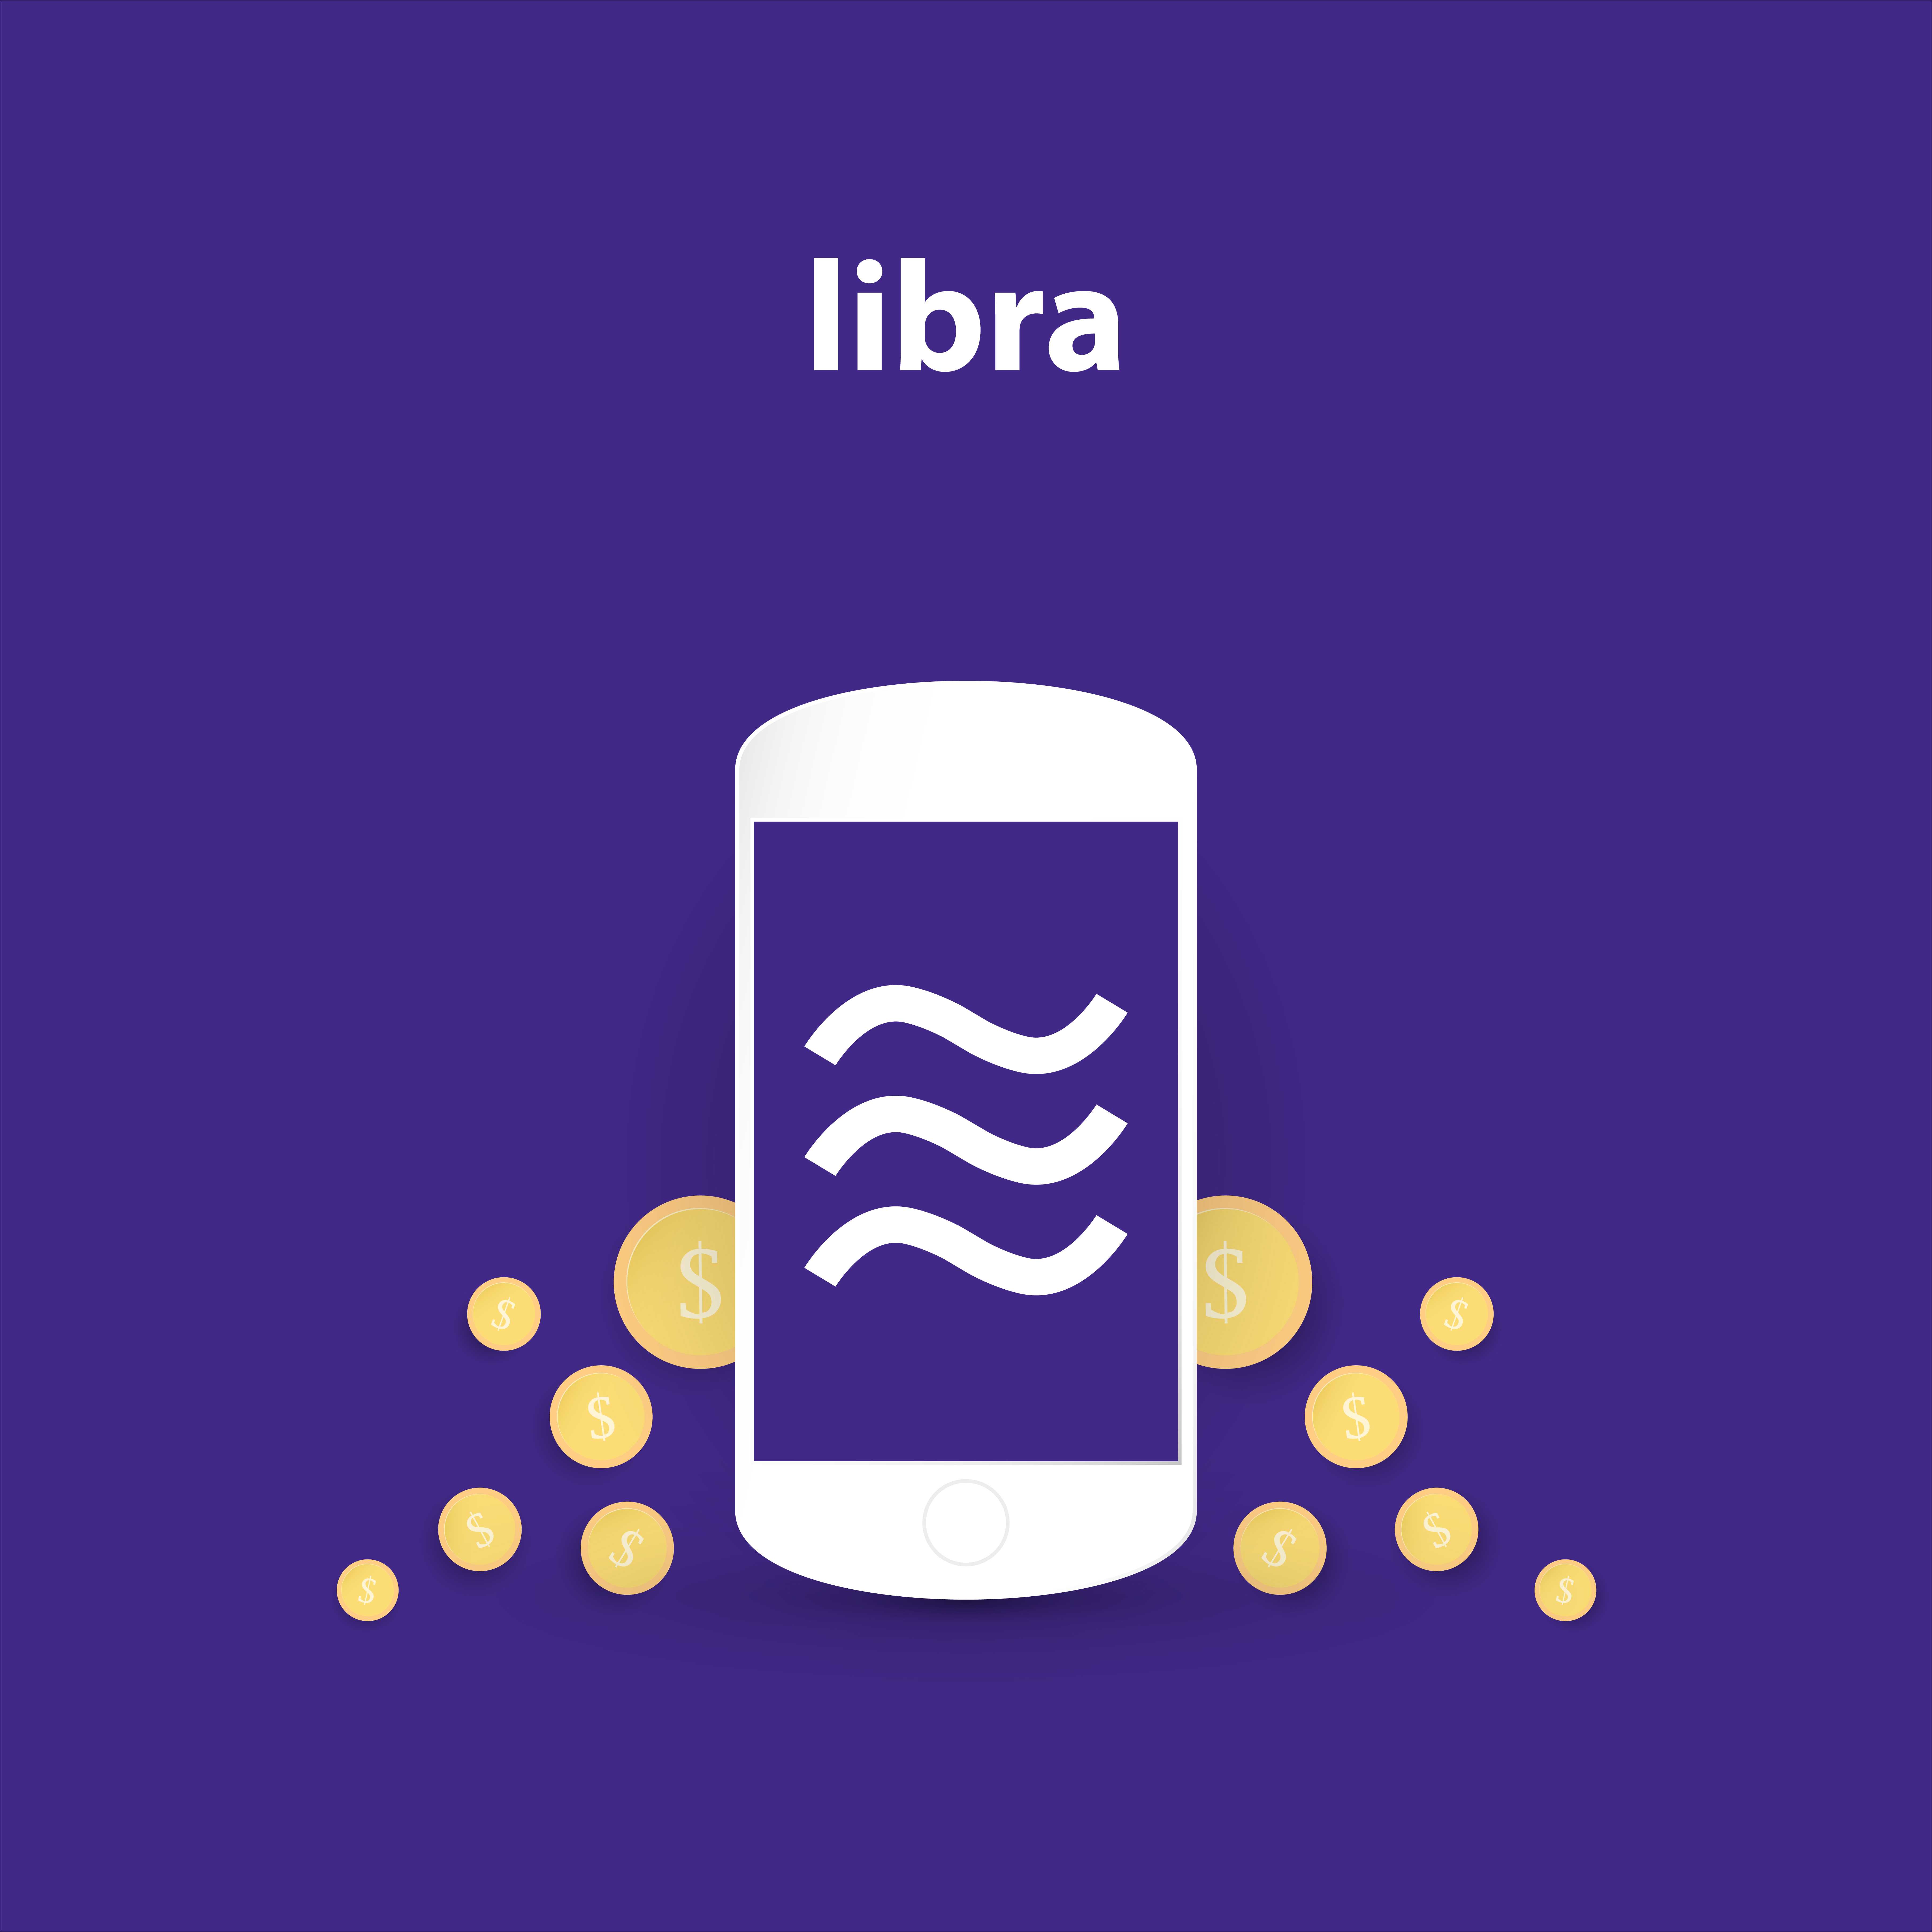 Libra sign for new crypto currency. Vector illustration in ...